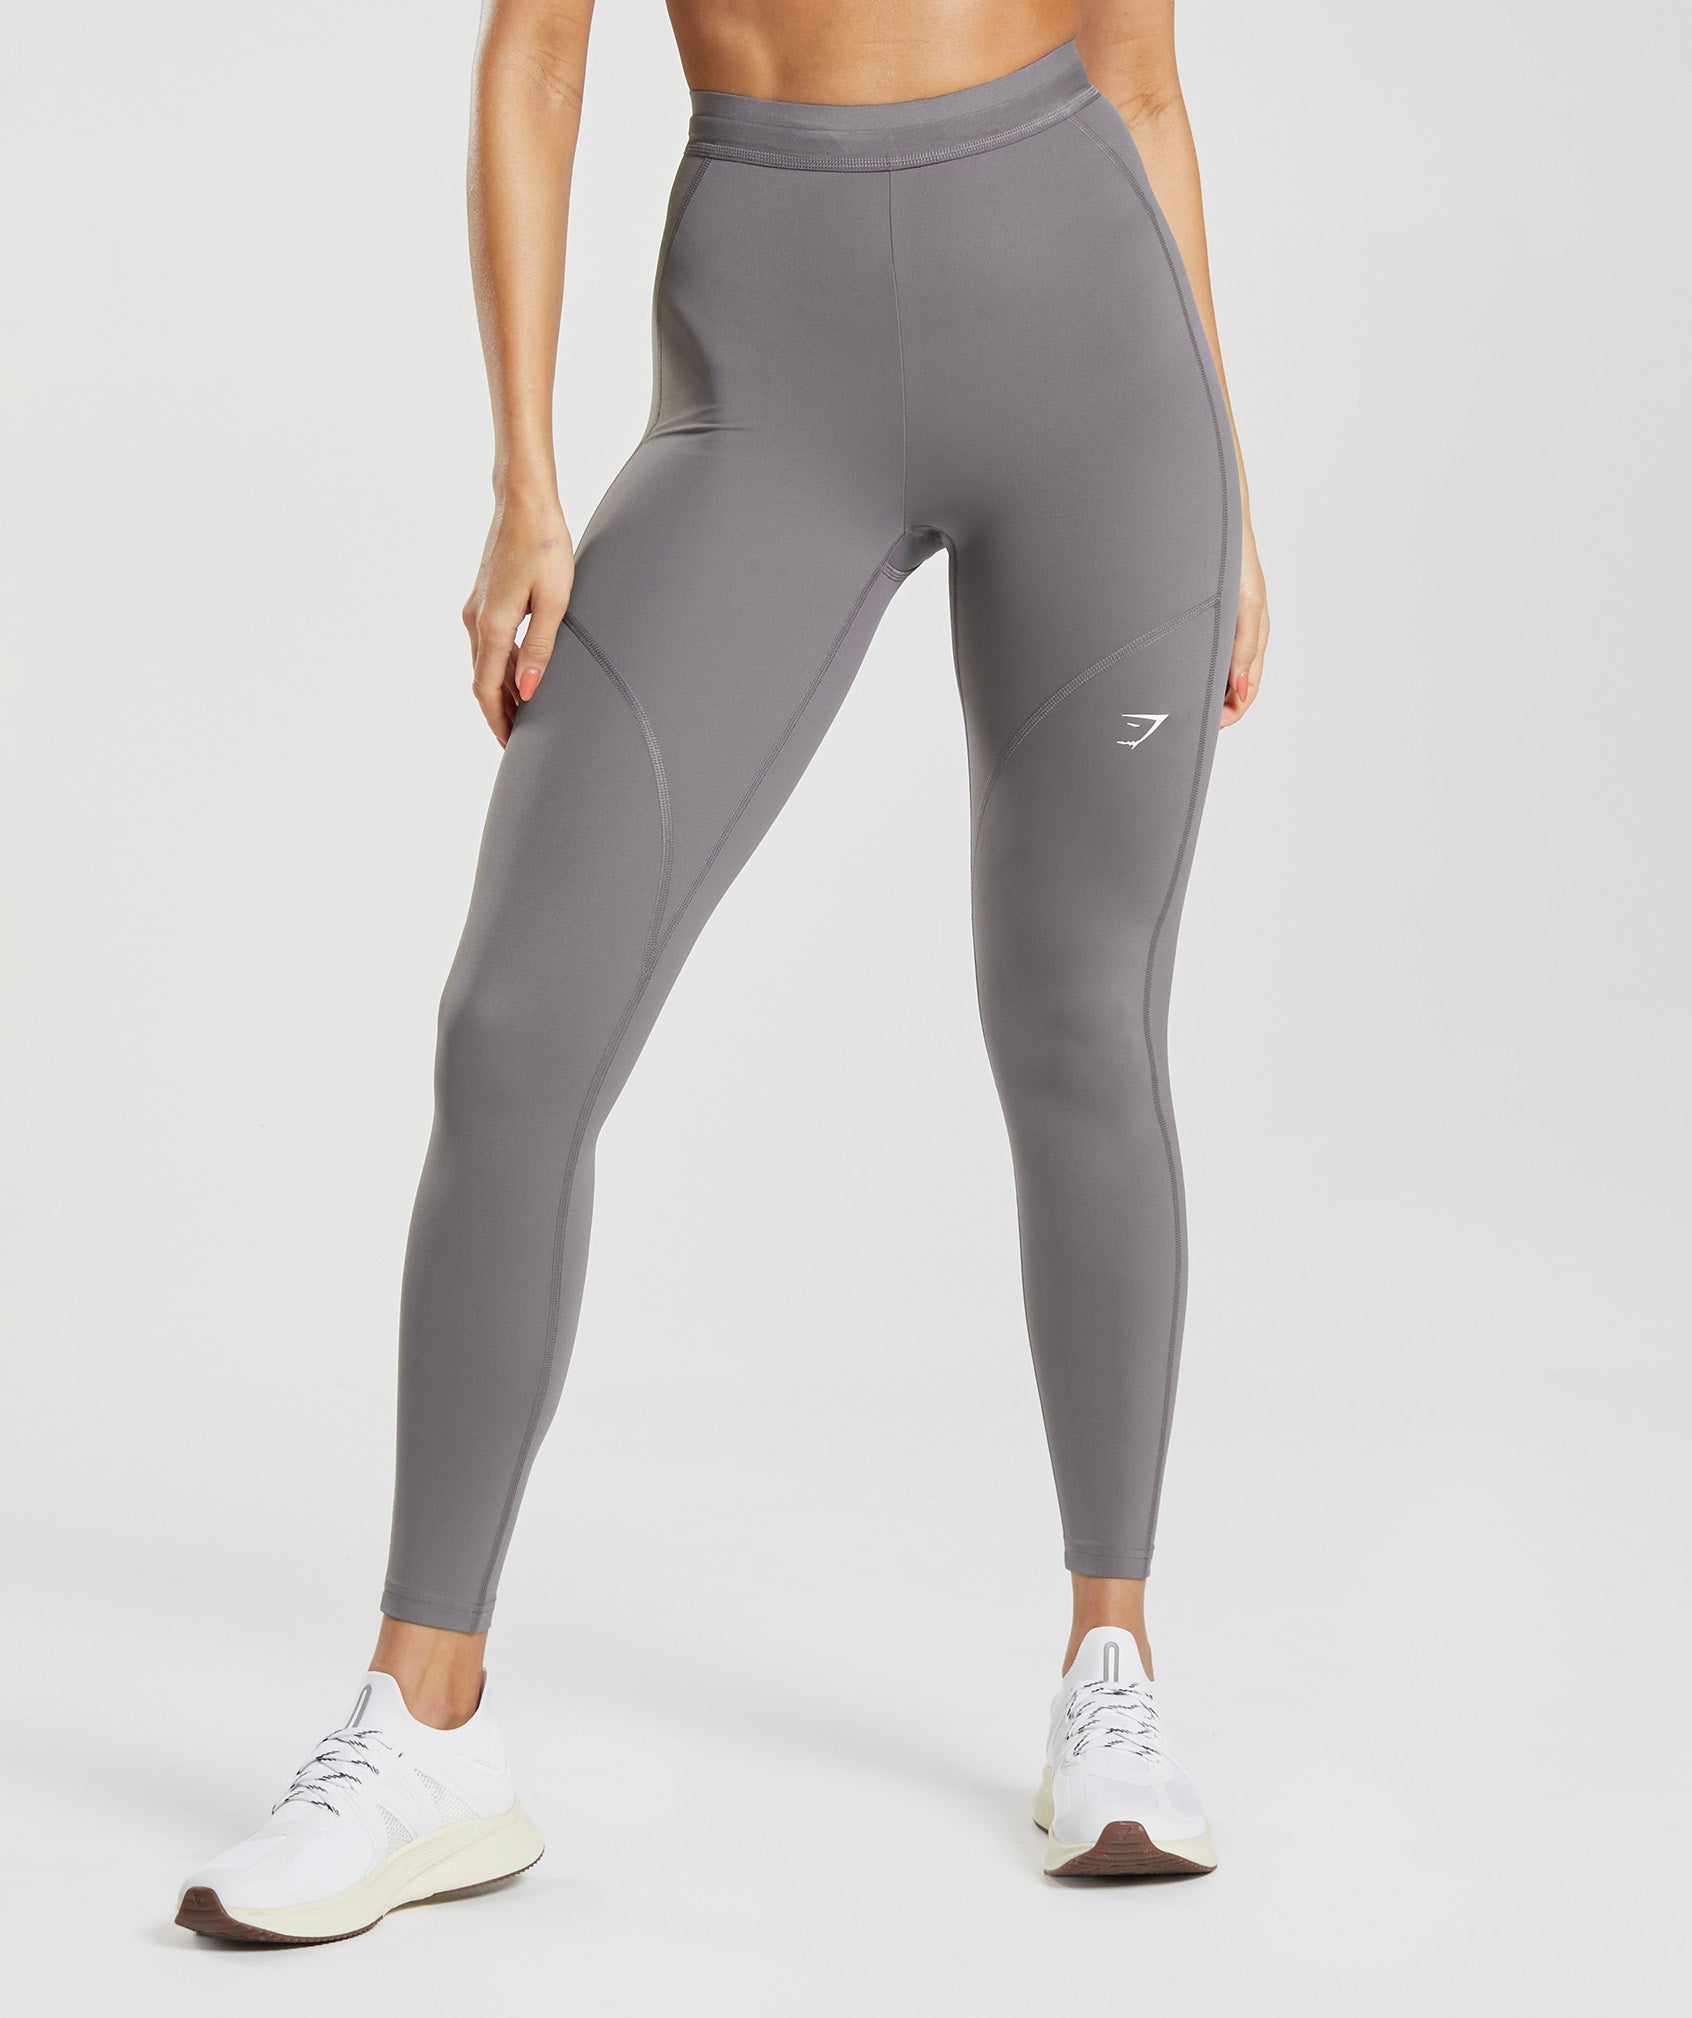 Gymshark leggings grey ladies womens stretch workout sports everyday basic  small